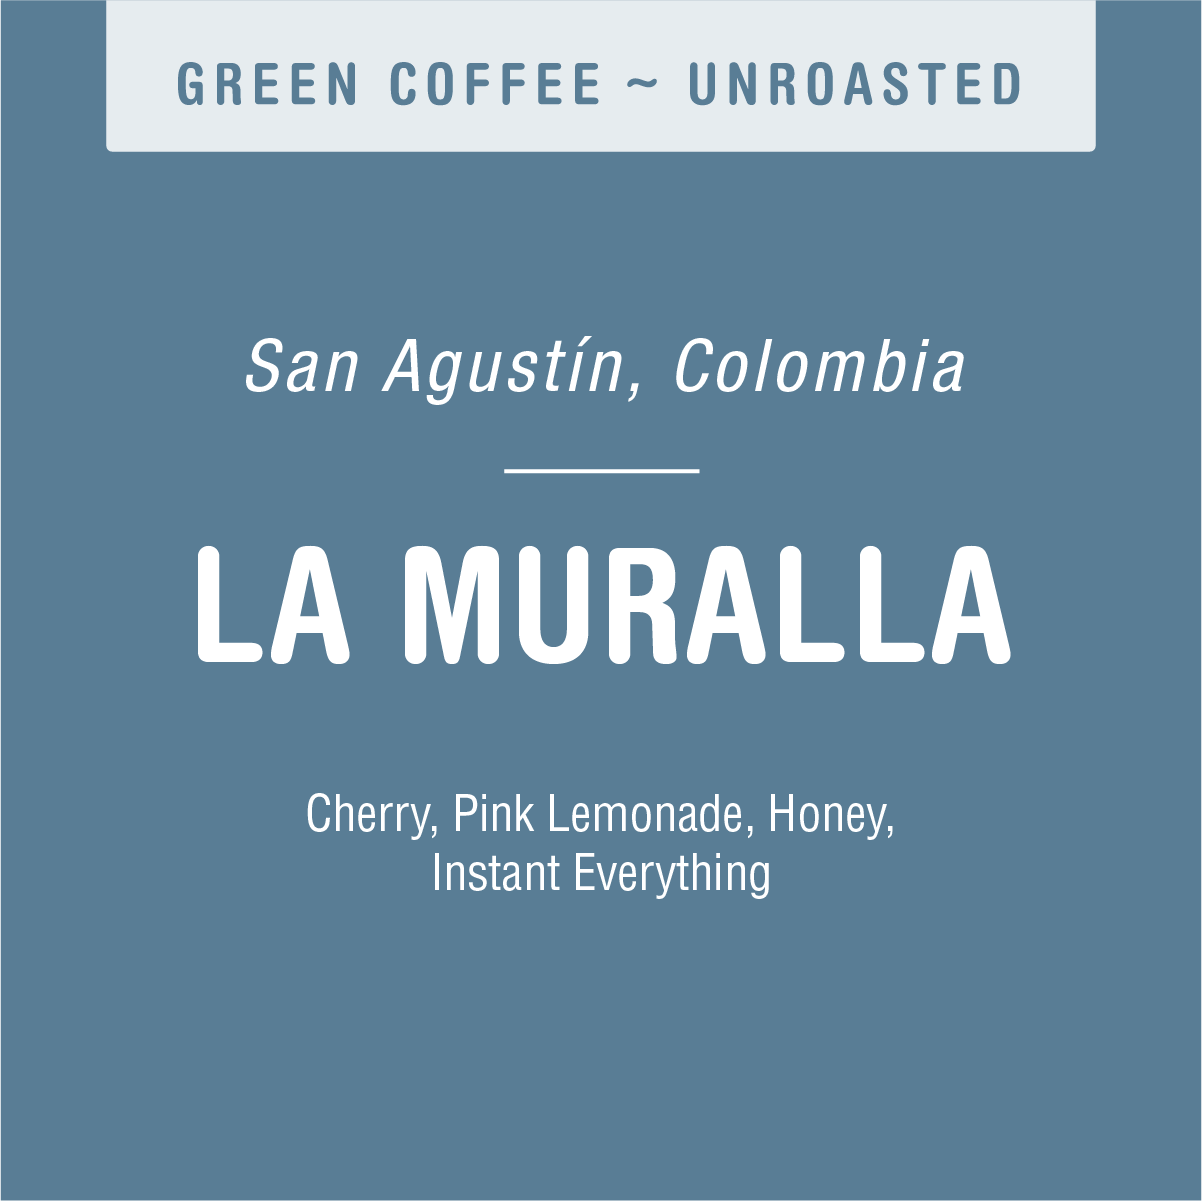 A promotional graphic for Tandem Coffee Roasters' La Muralla (GREEN) high-end coffee from San Agustín, Colombia featuring flavor notes of cherry, pink lemonade, honey, and instant everything.